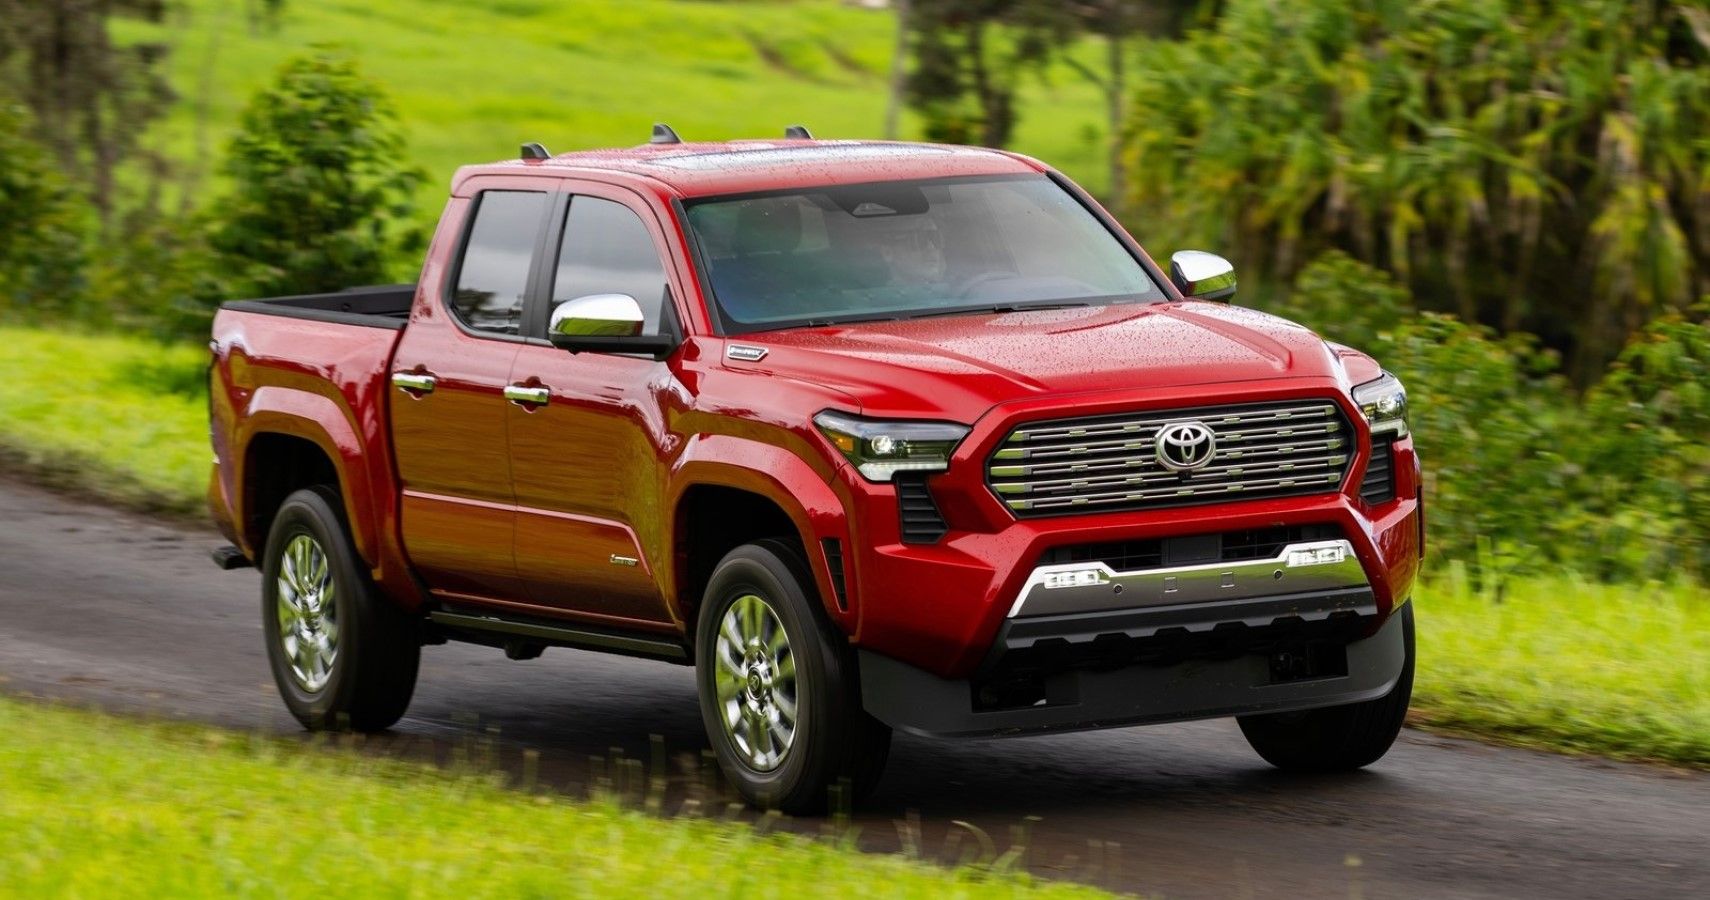 5 Most Innovative Features Of The New Toyota Tacoma (5 We Don't Like)